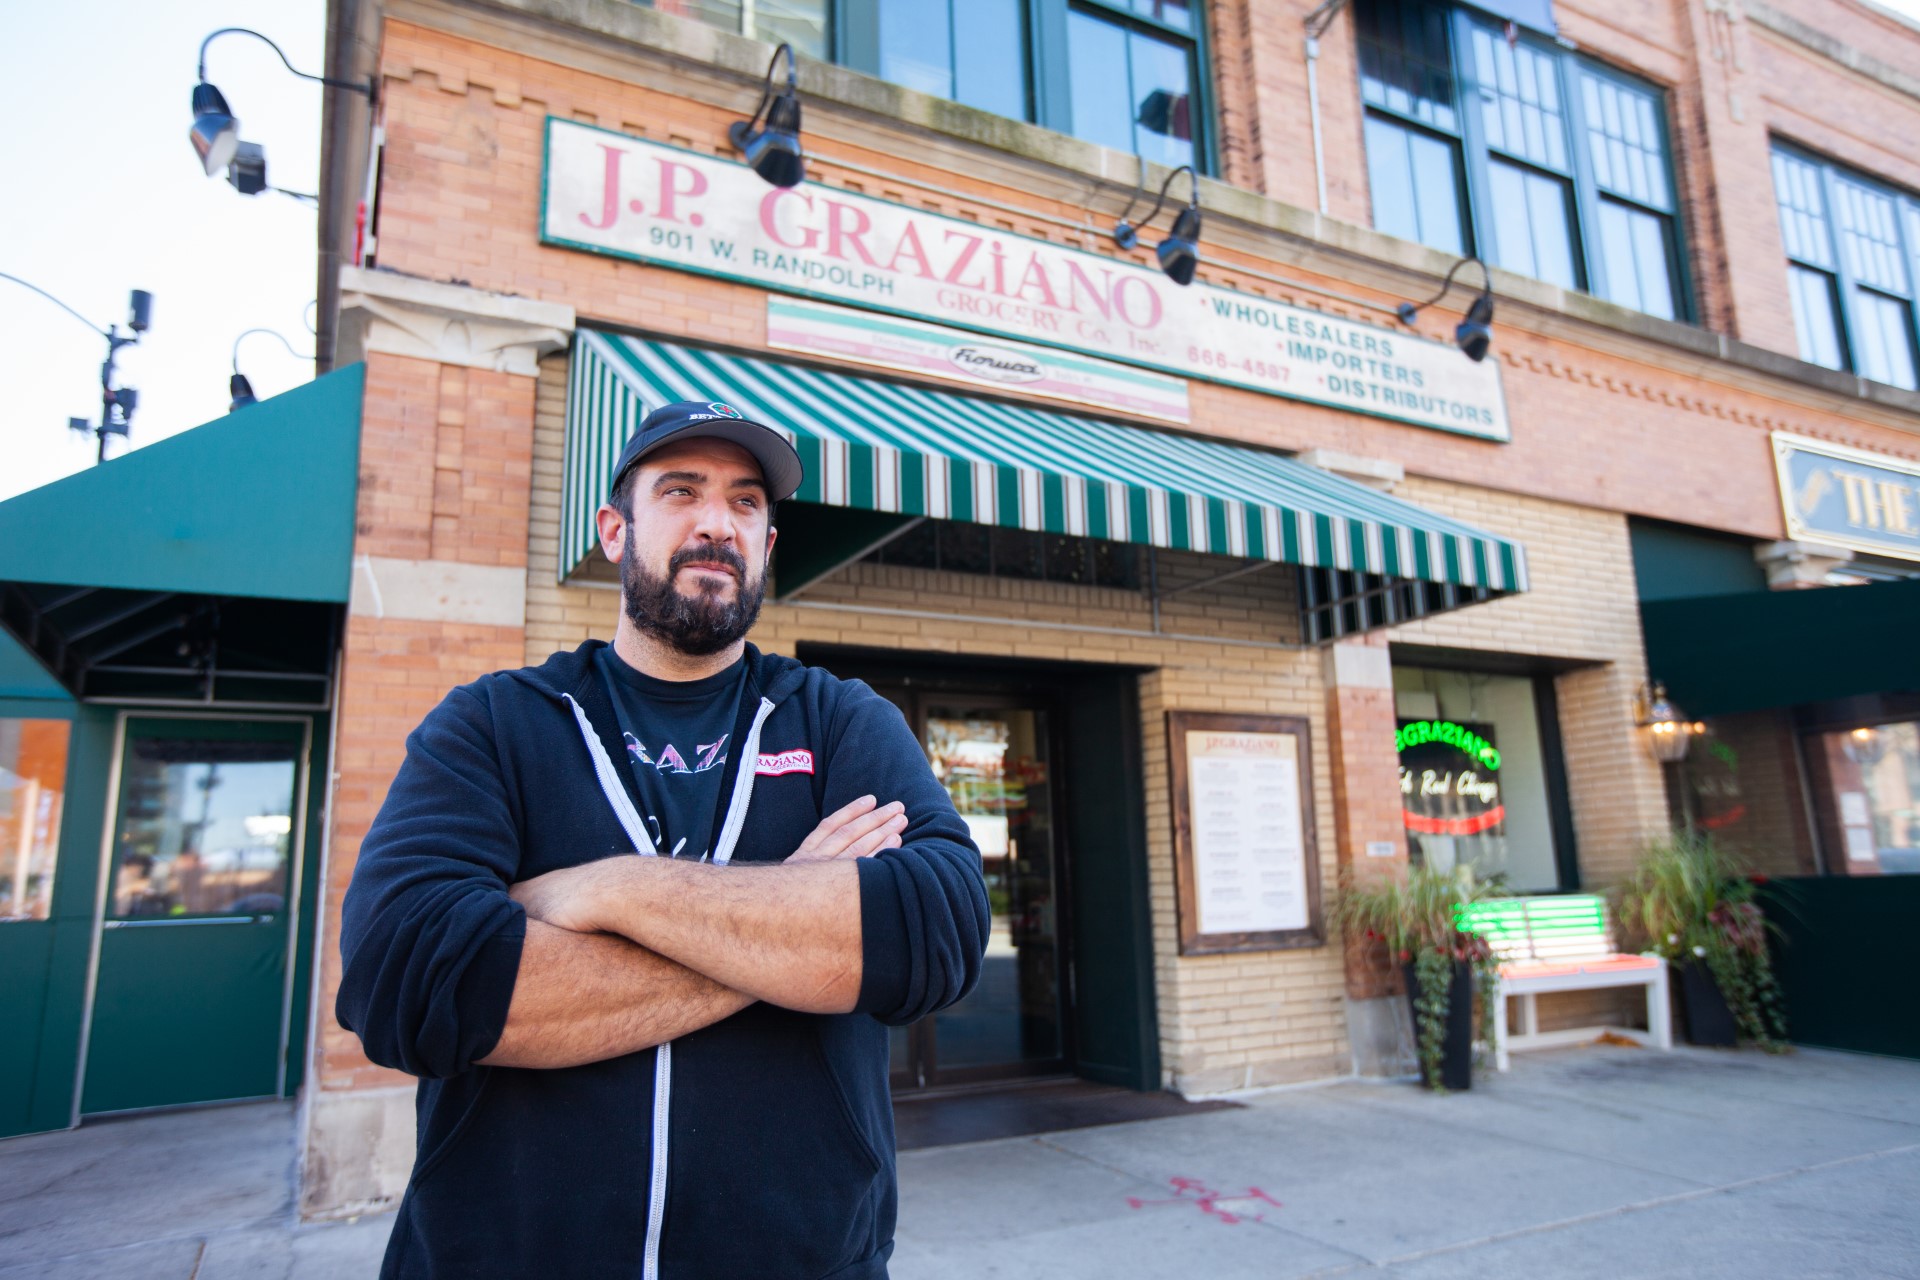 The Pride of the West Loop: A Sit Down with Jim Graziano of JP Graziano